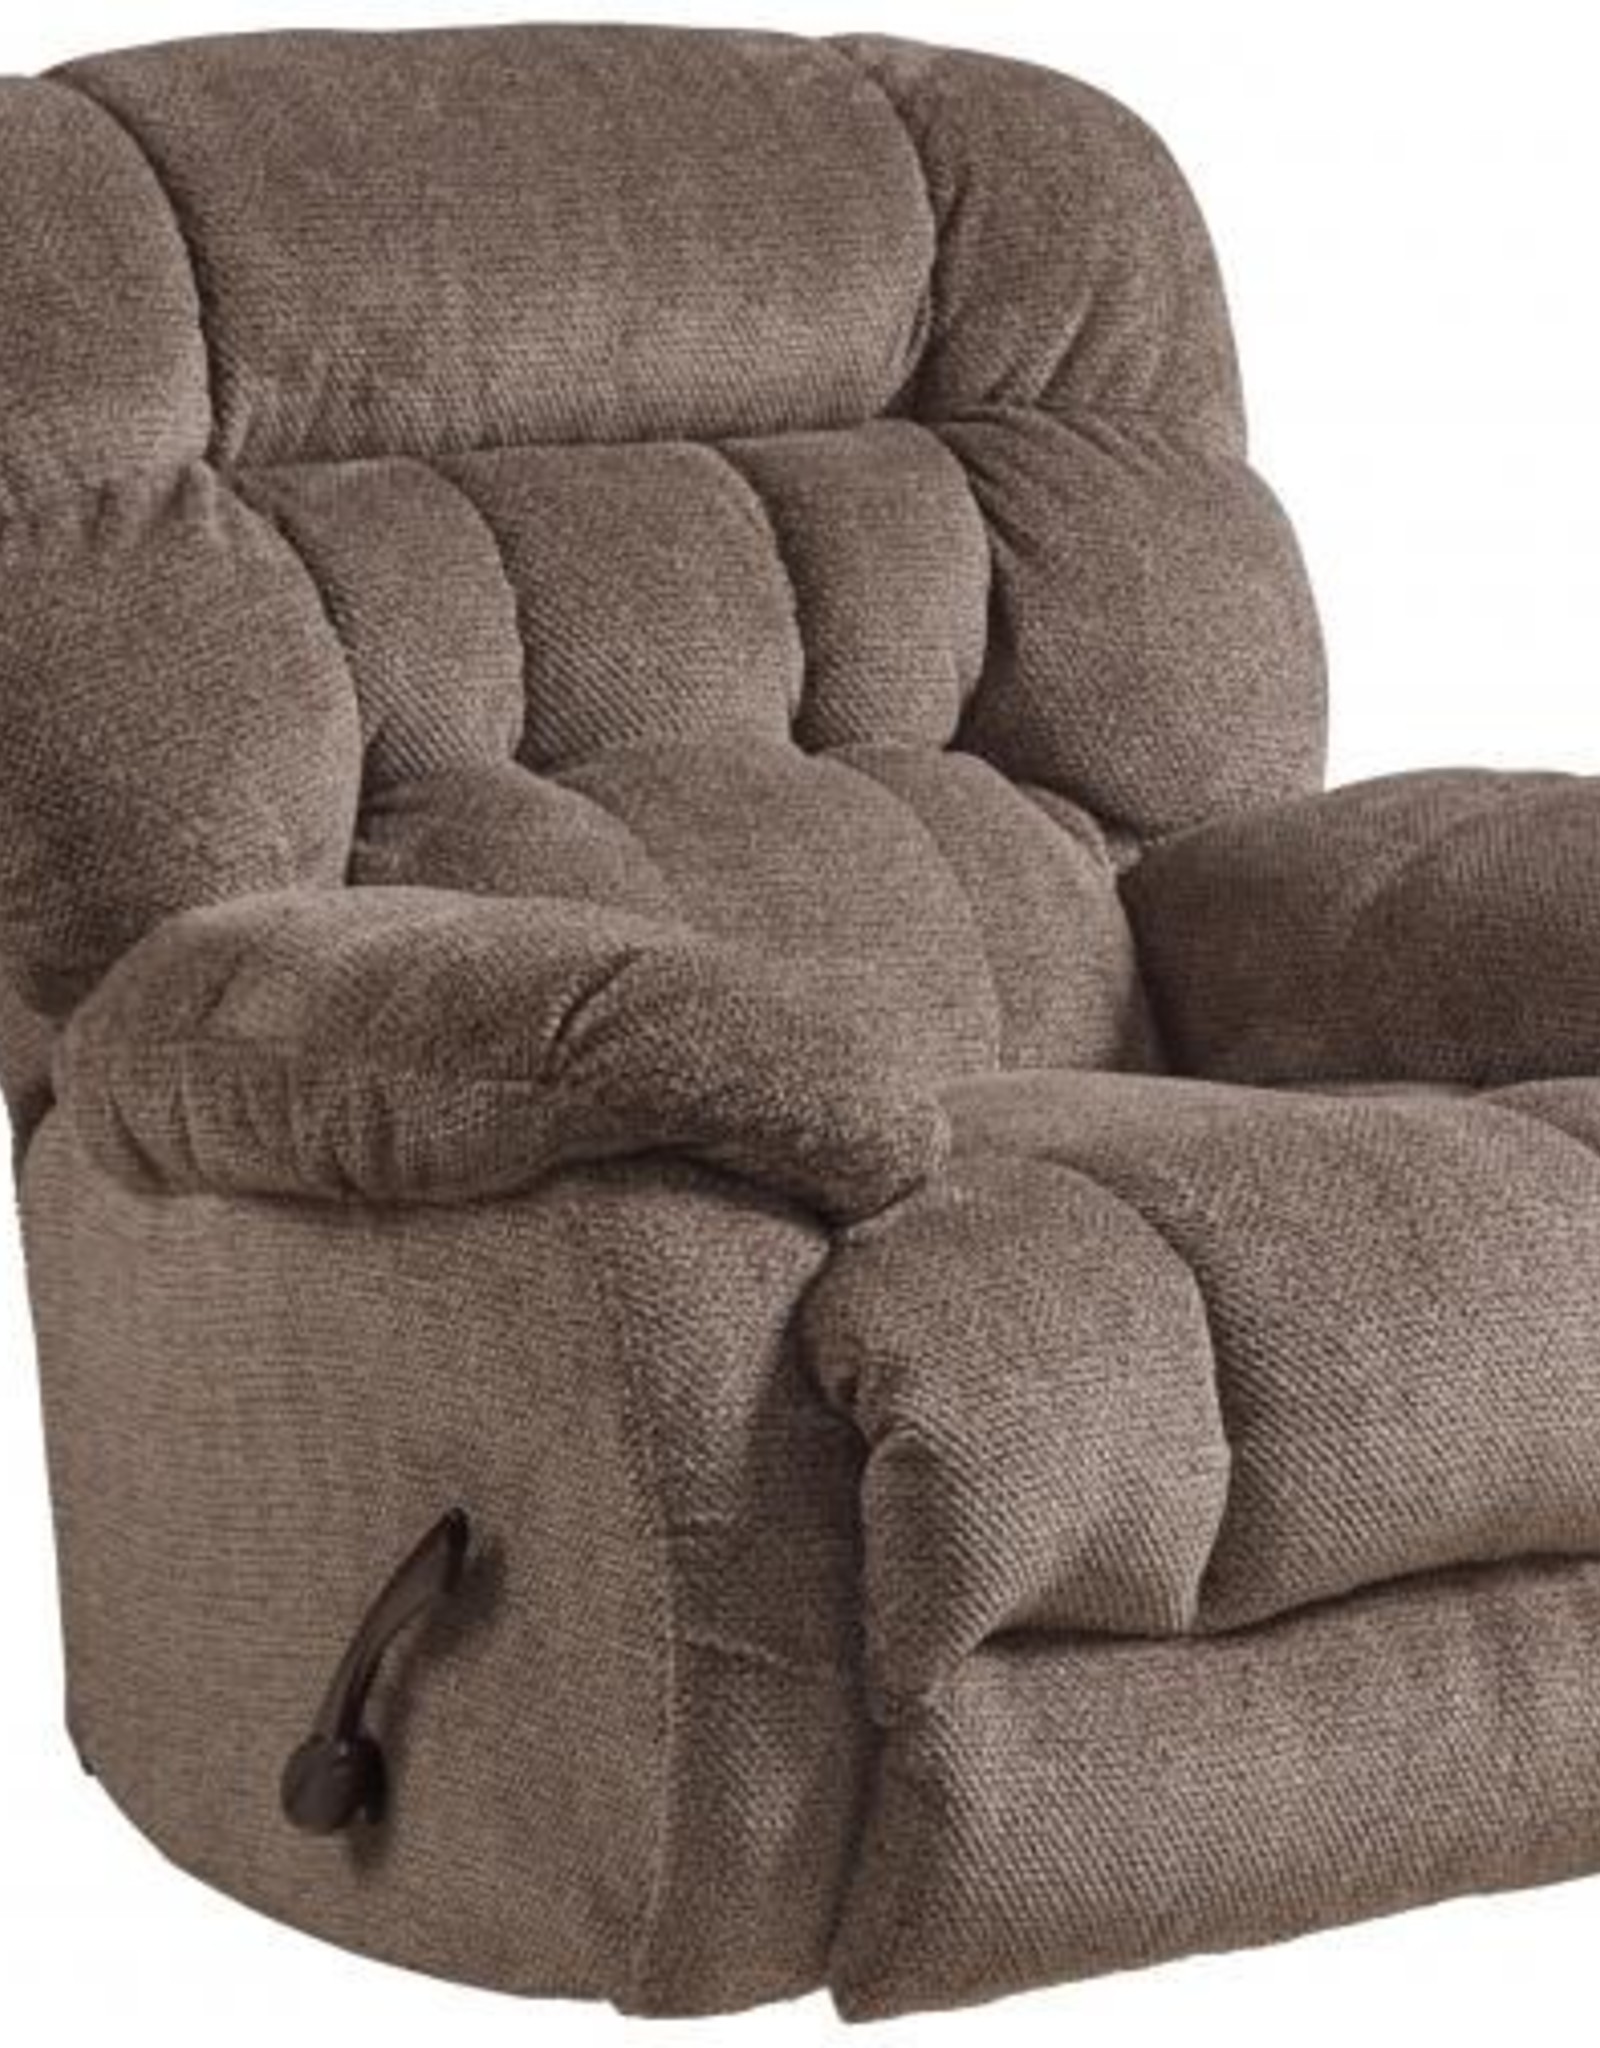 Jackson Catnapper Daly Swivel Chateau Recliner